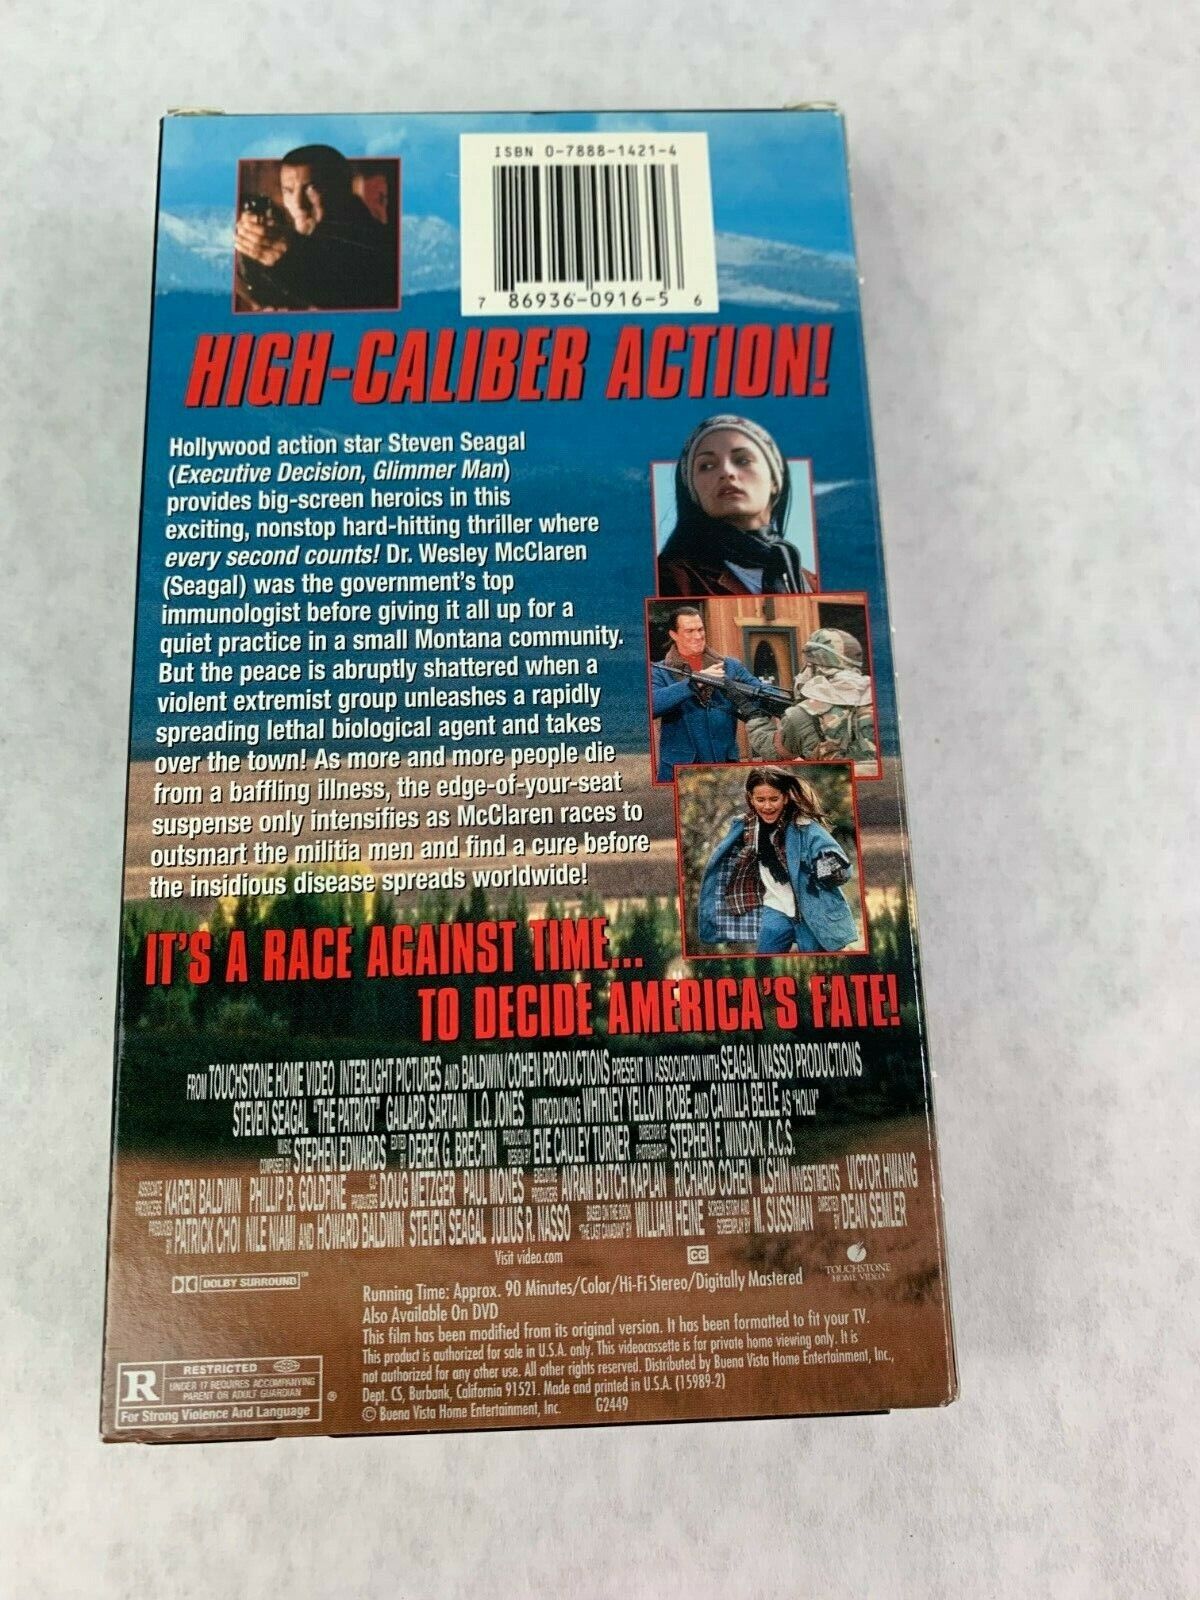 Vintage Classic The Patriot 1999 VHS Tape Movie Steven Seagal